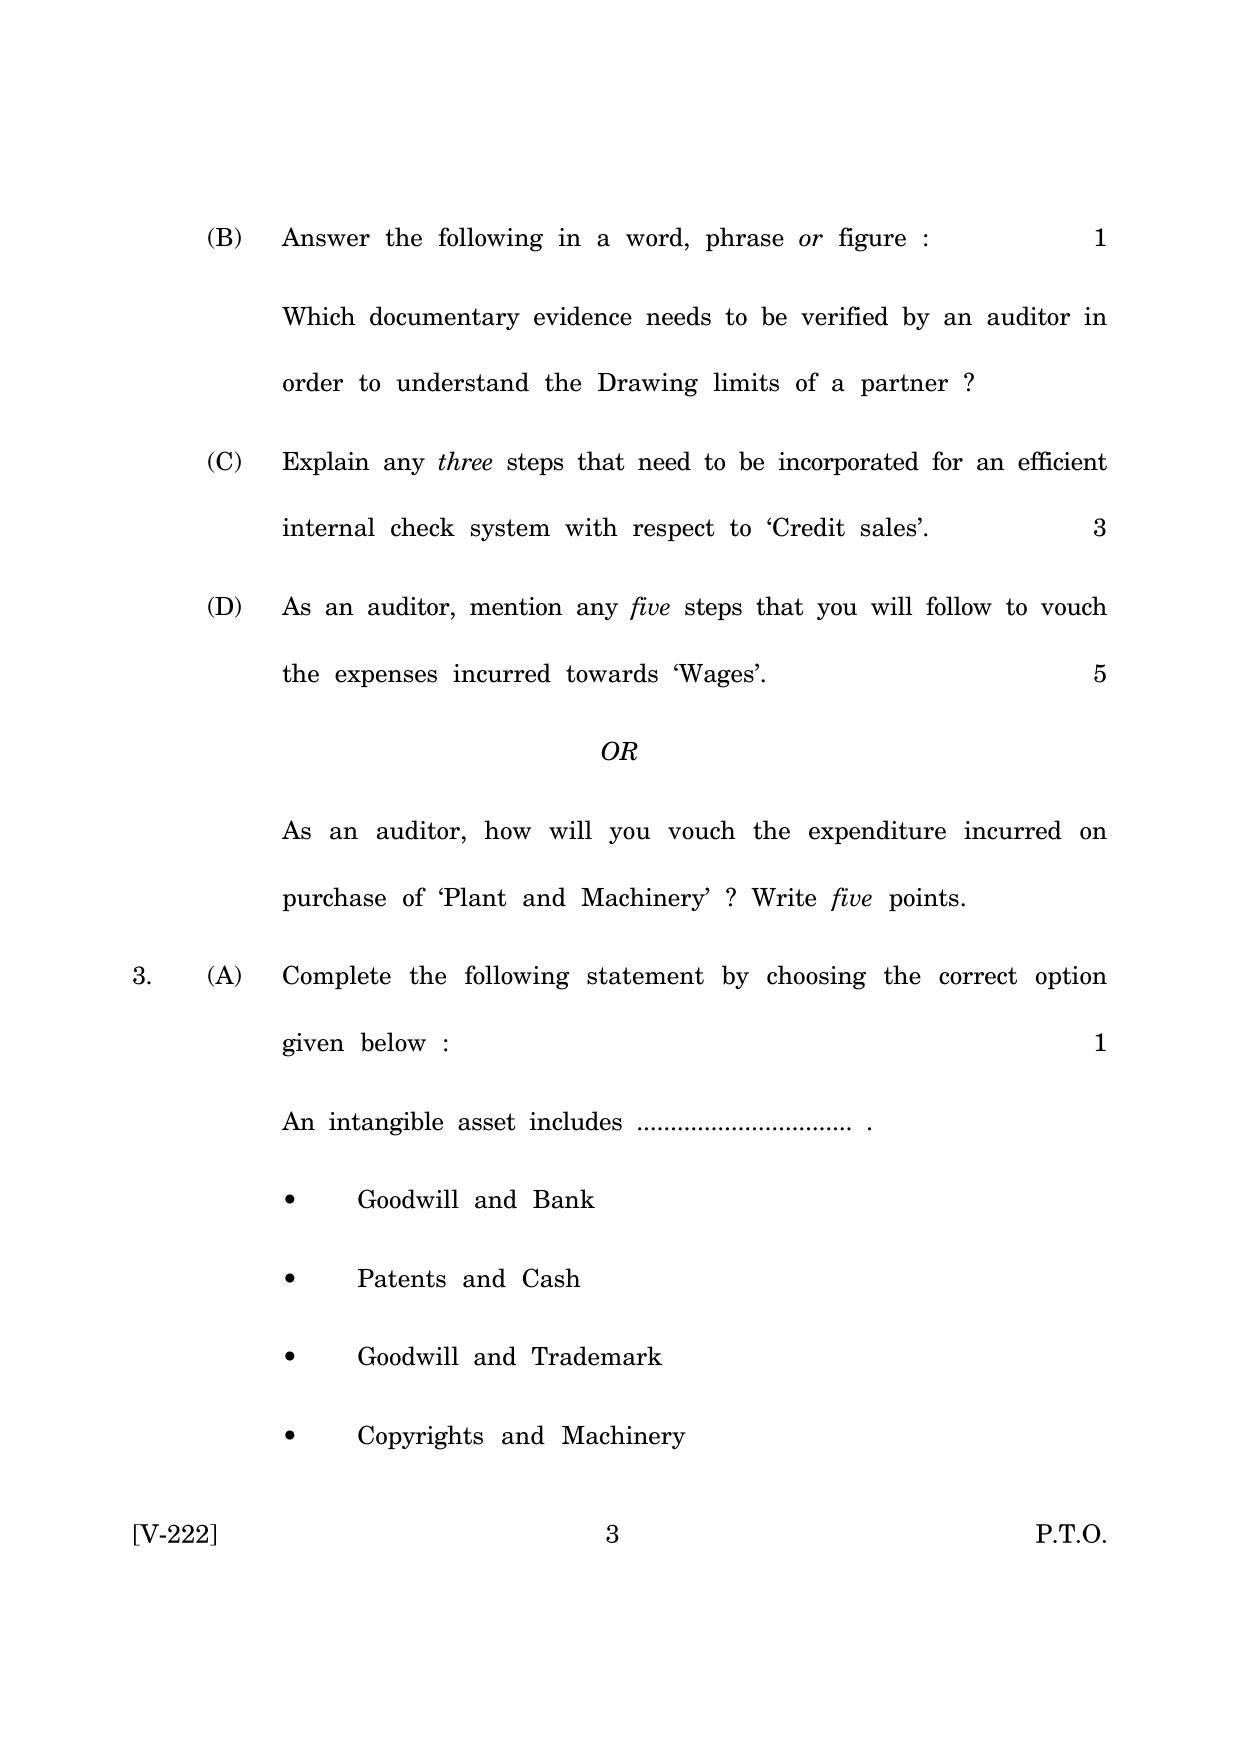 Goa Board Class 12 Principles & Practice of Auditing  2019 (March 2019) Question Paper - Page 3